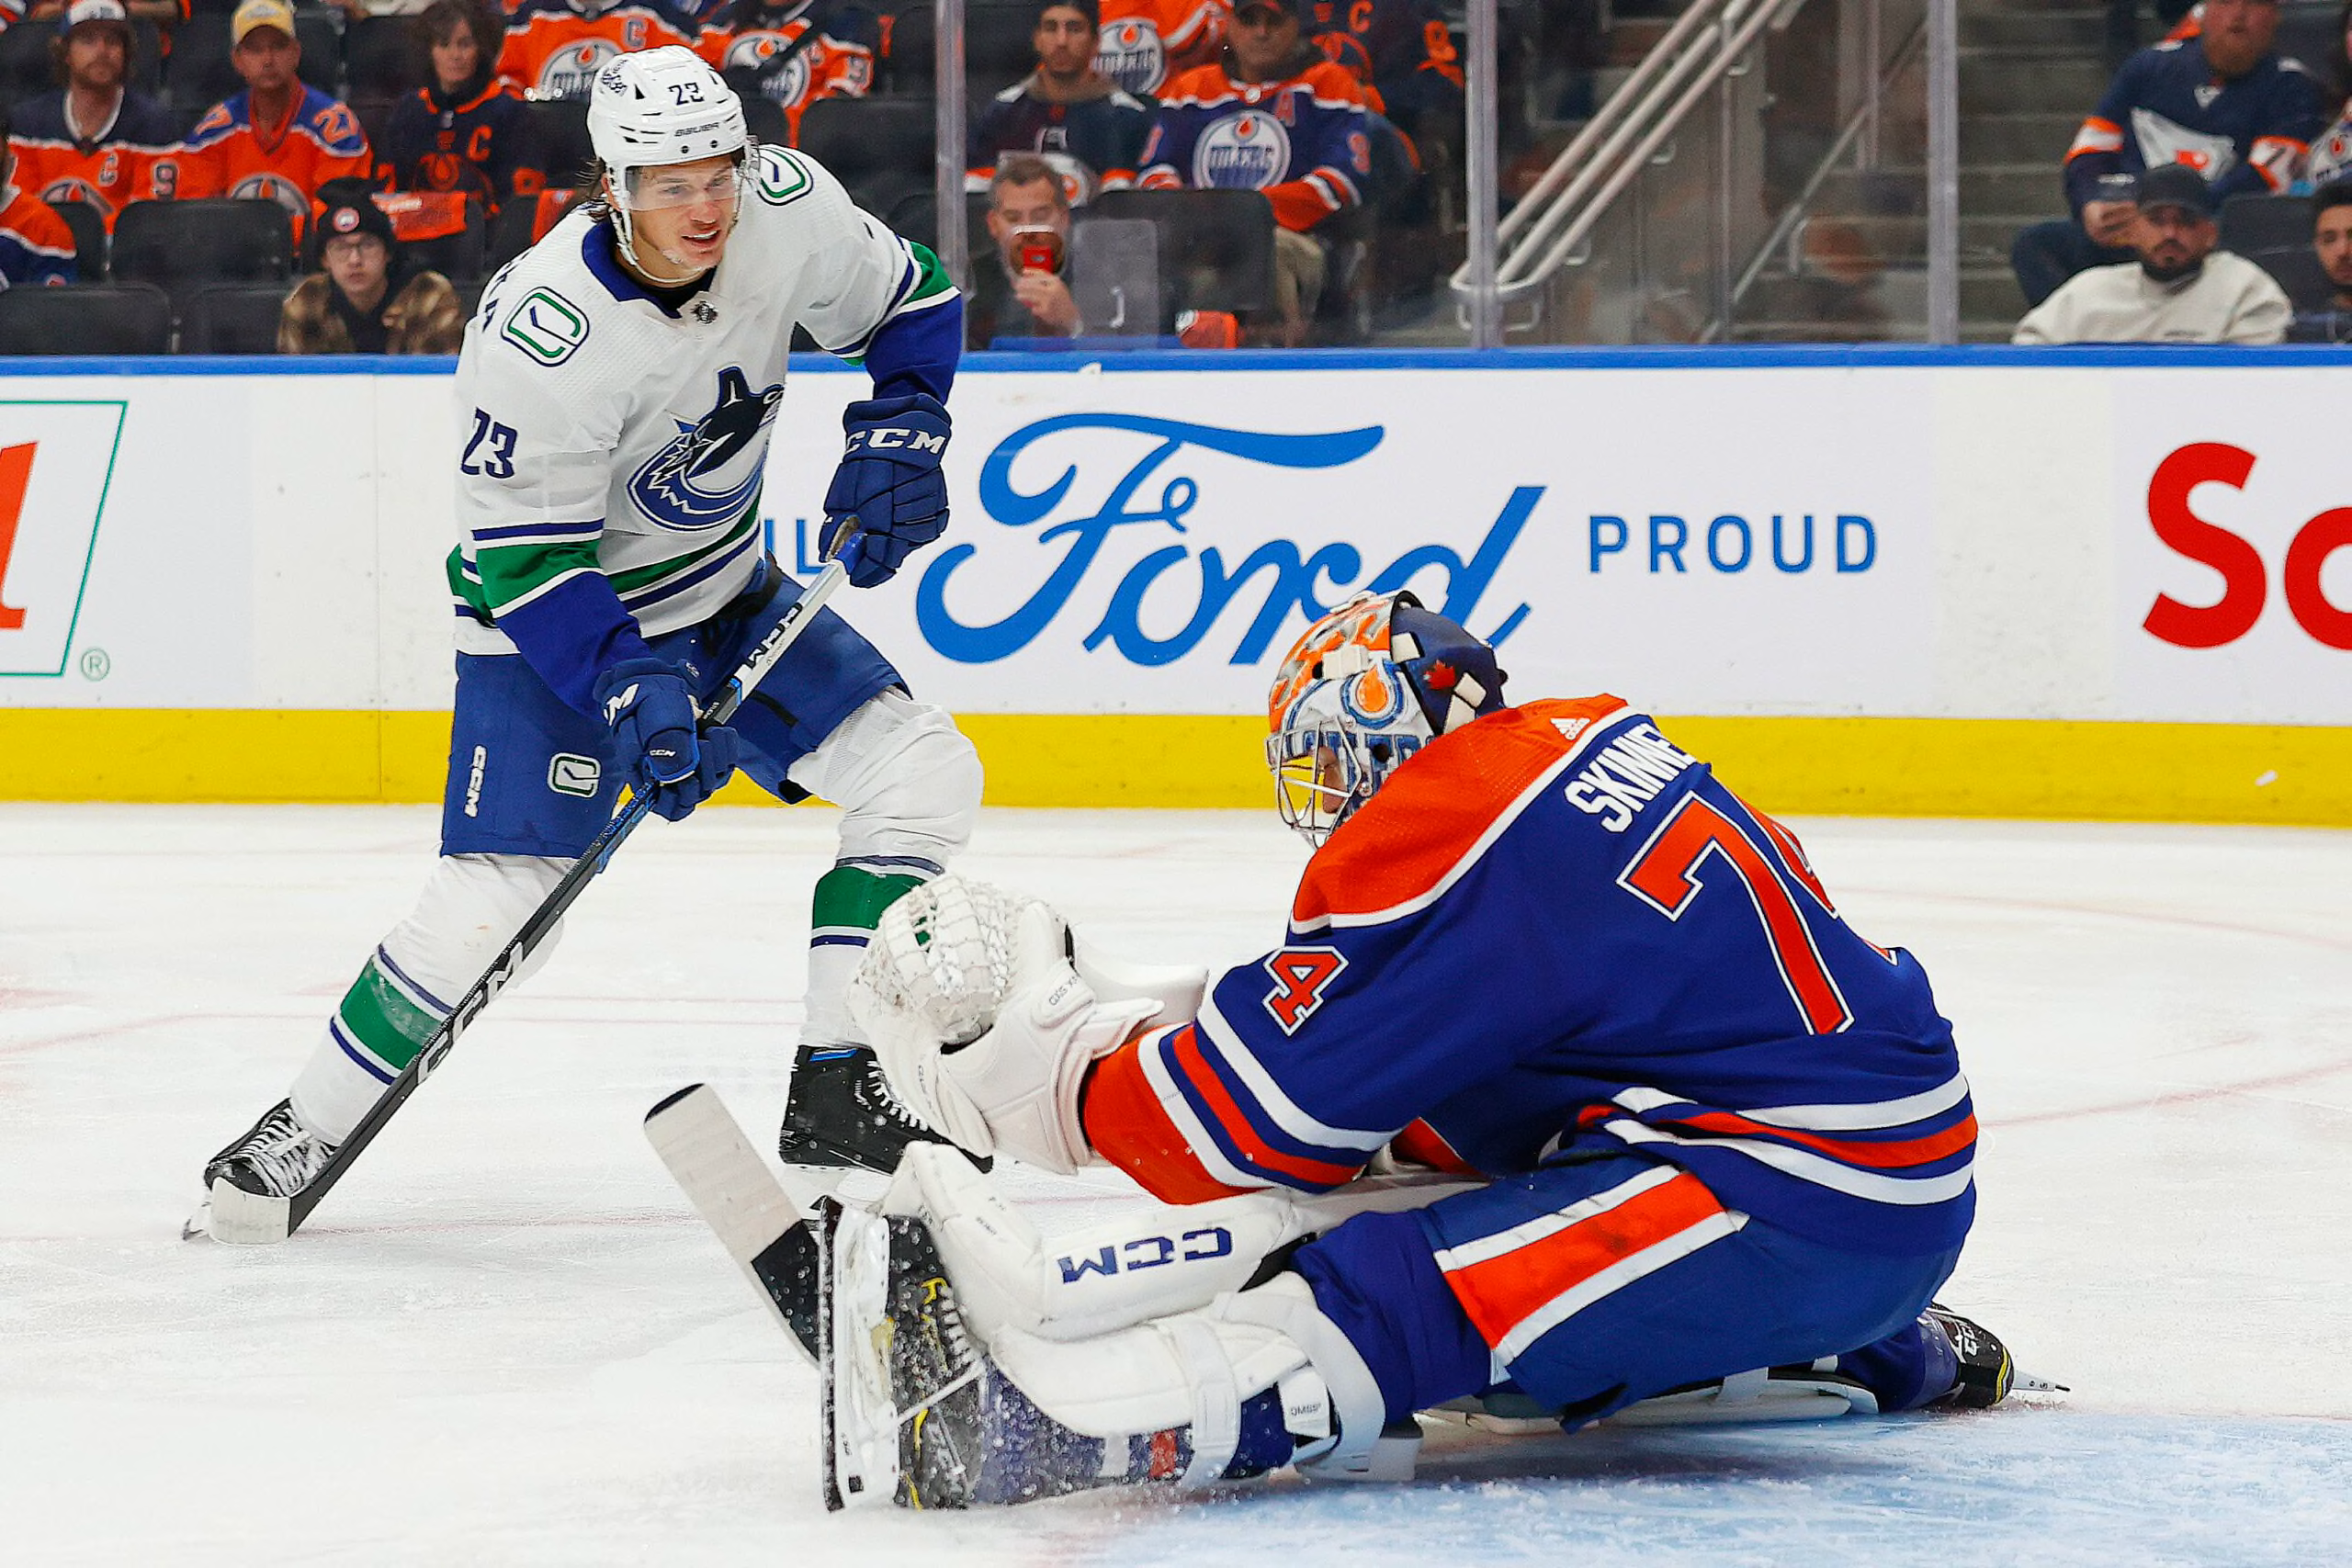 Oilers lose to Canucks in NHL opener